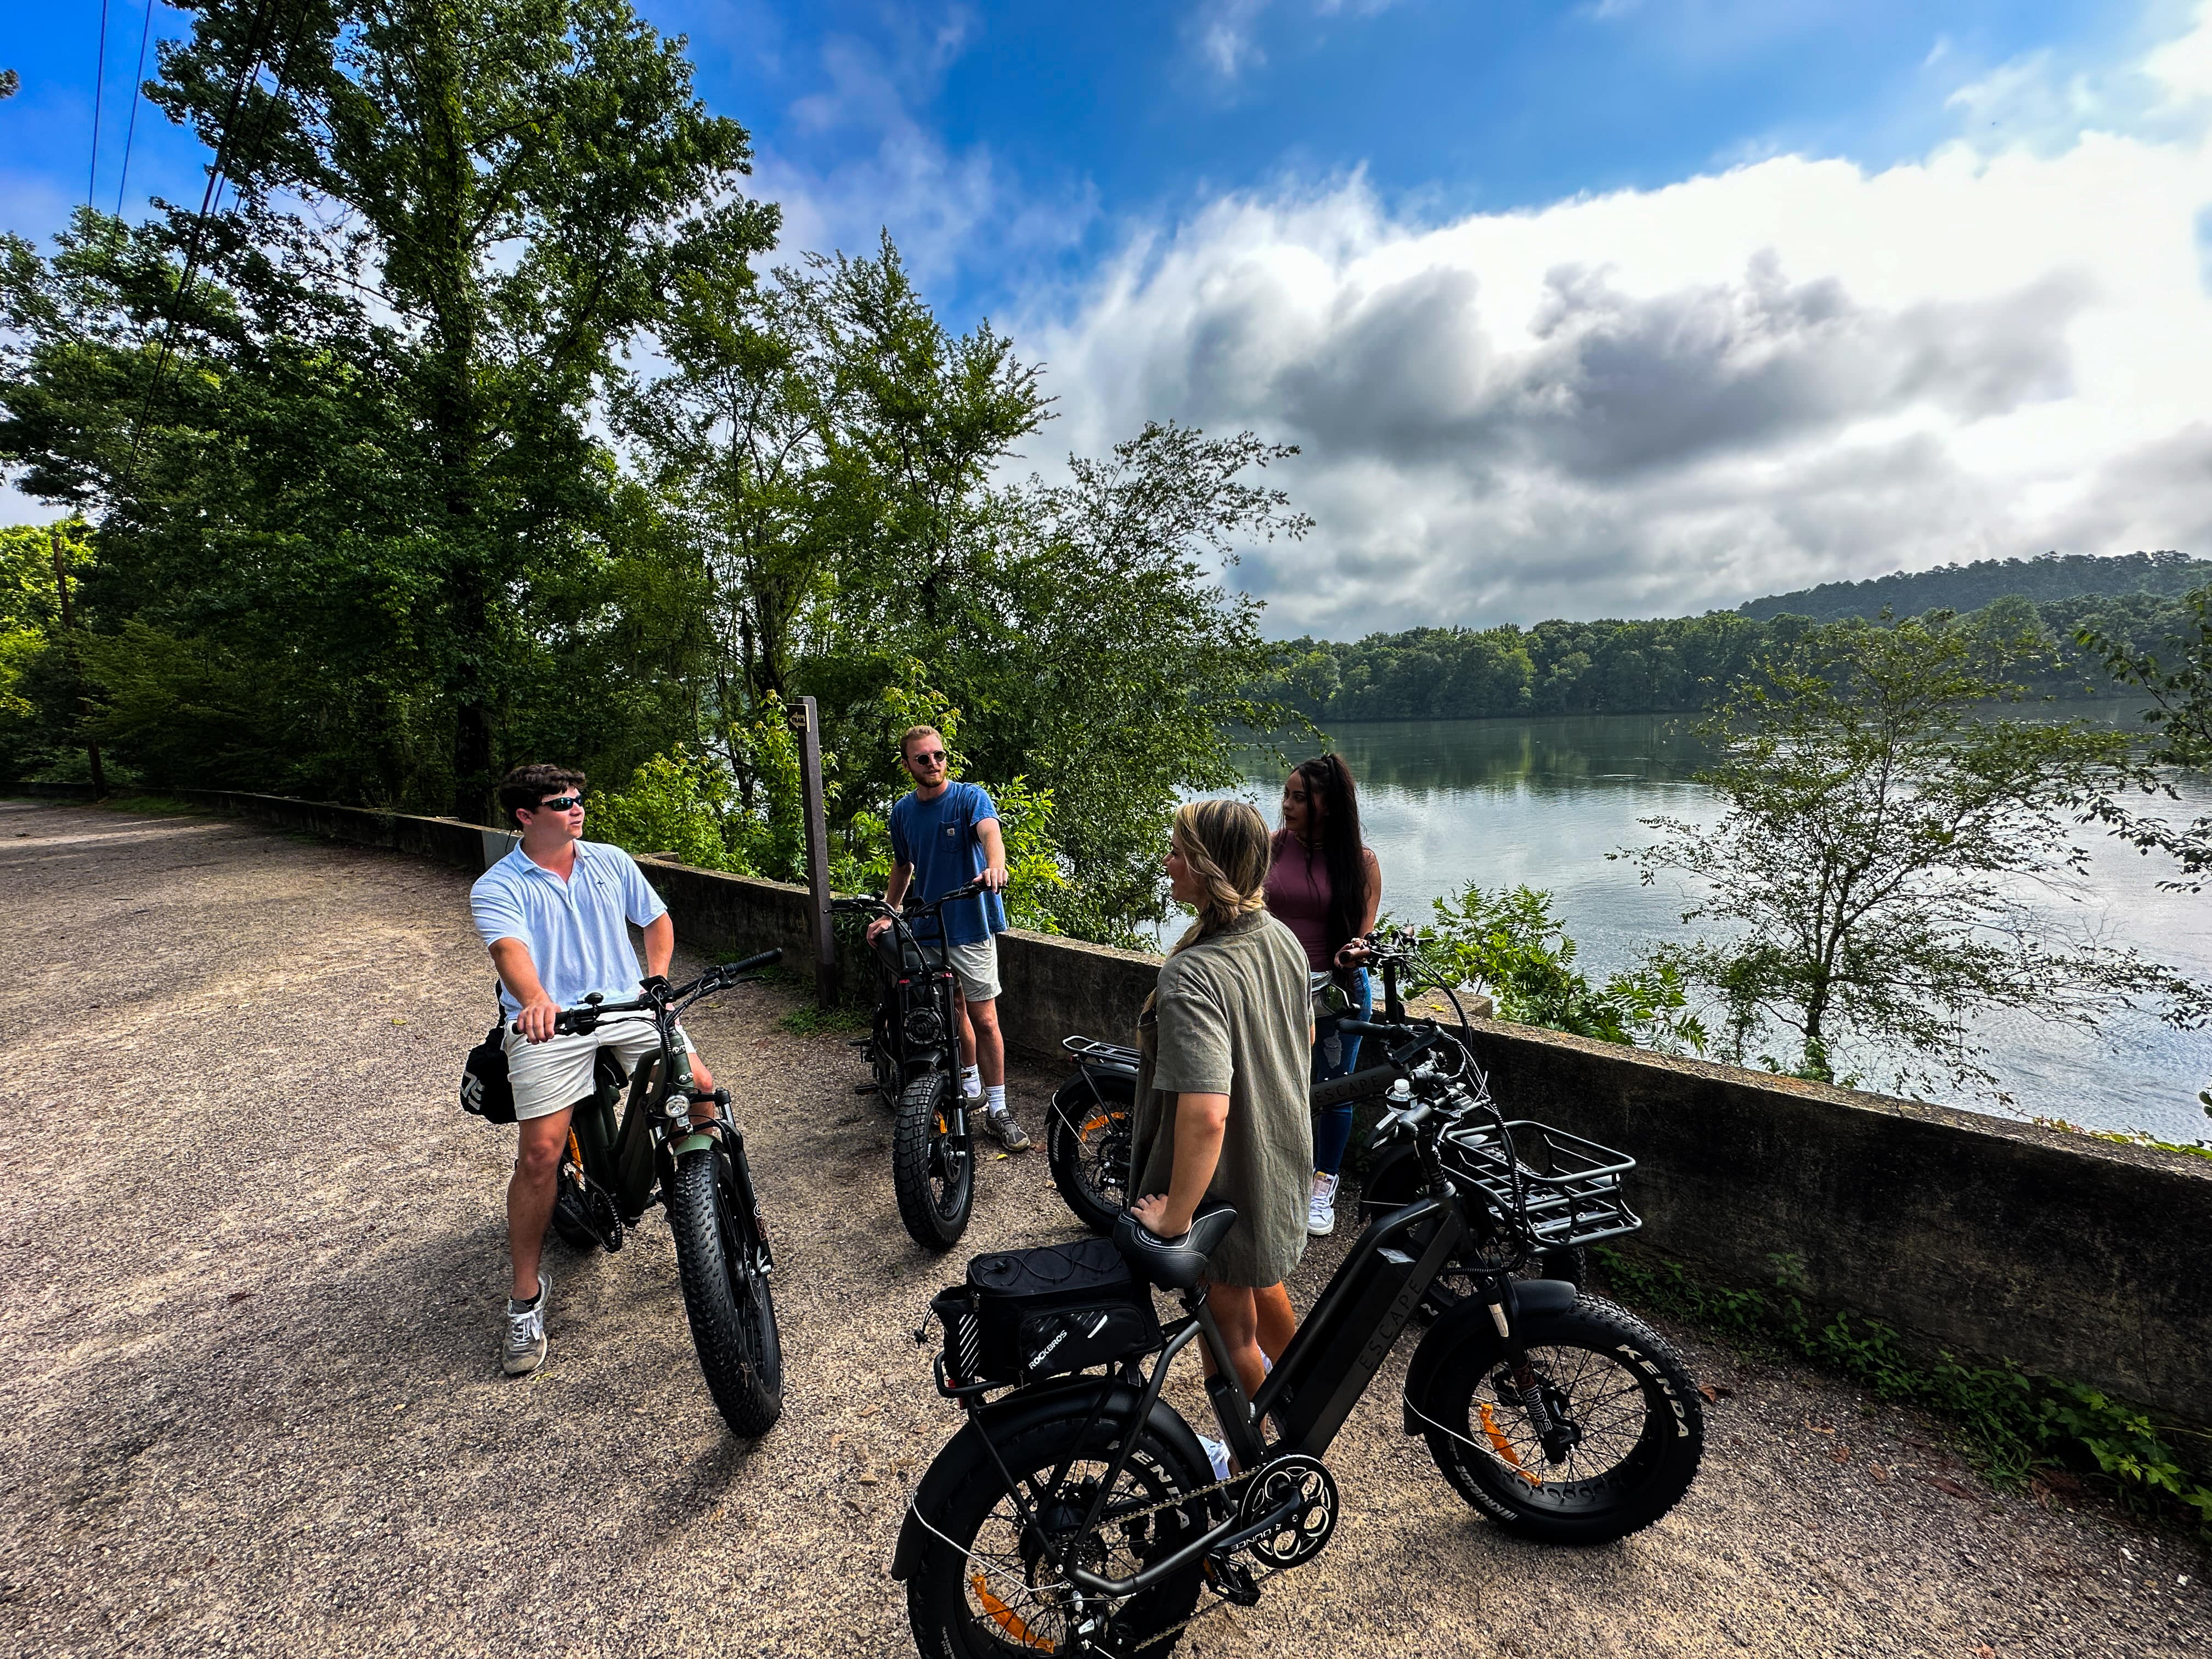 Escape Electric Bikes Aims to Help More People Enjoy the Outdoors With Their Selection of Electric Bikes and Scooters